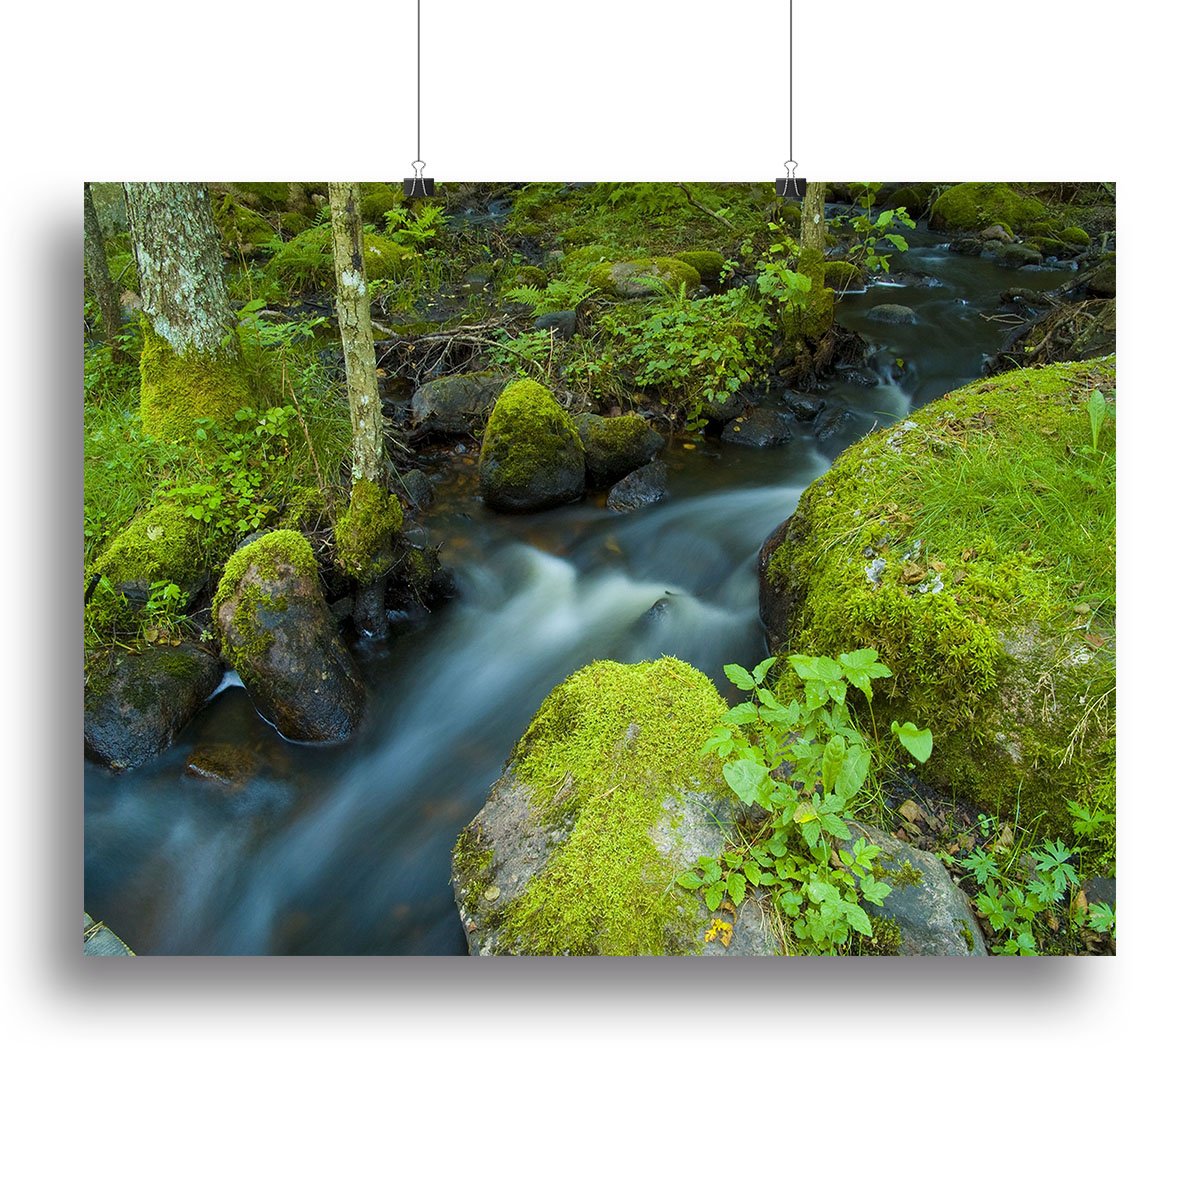 A small Canvas Print or Poster